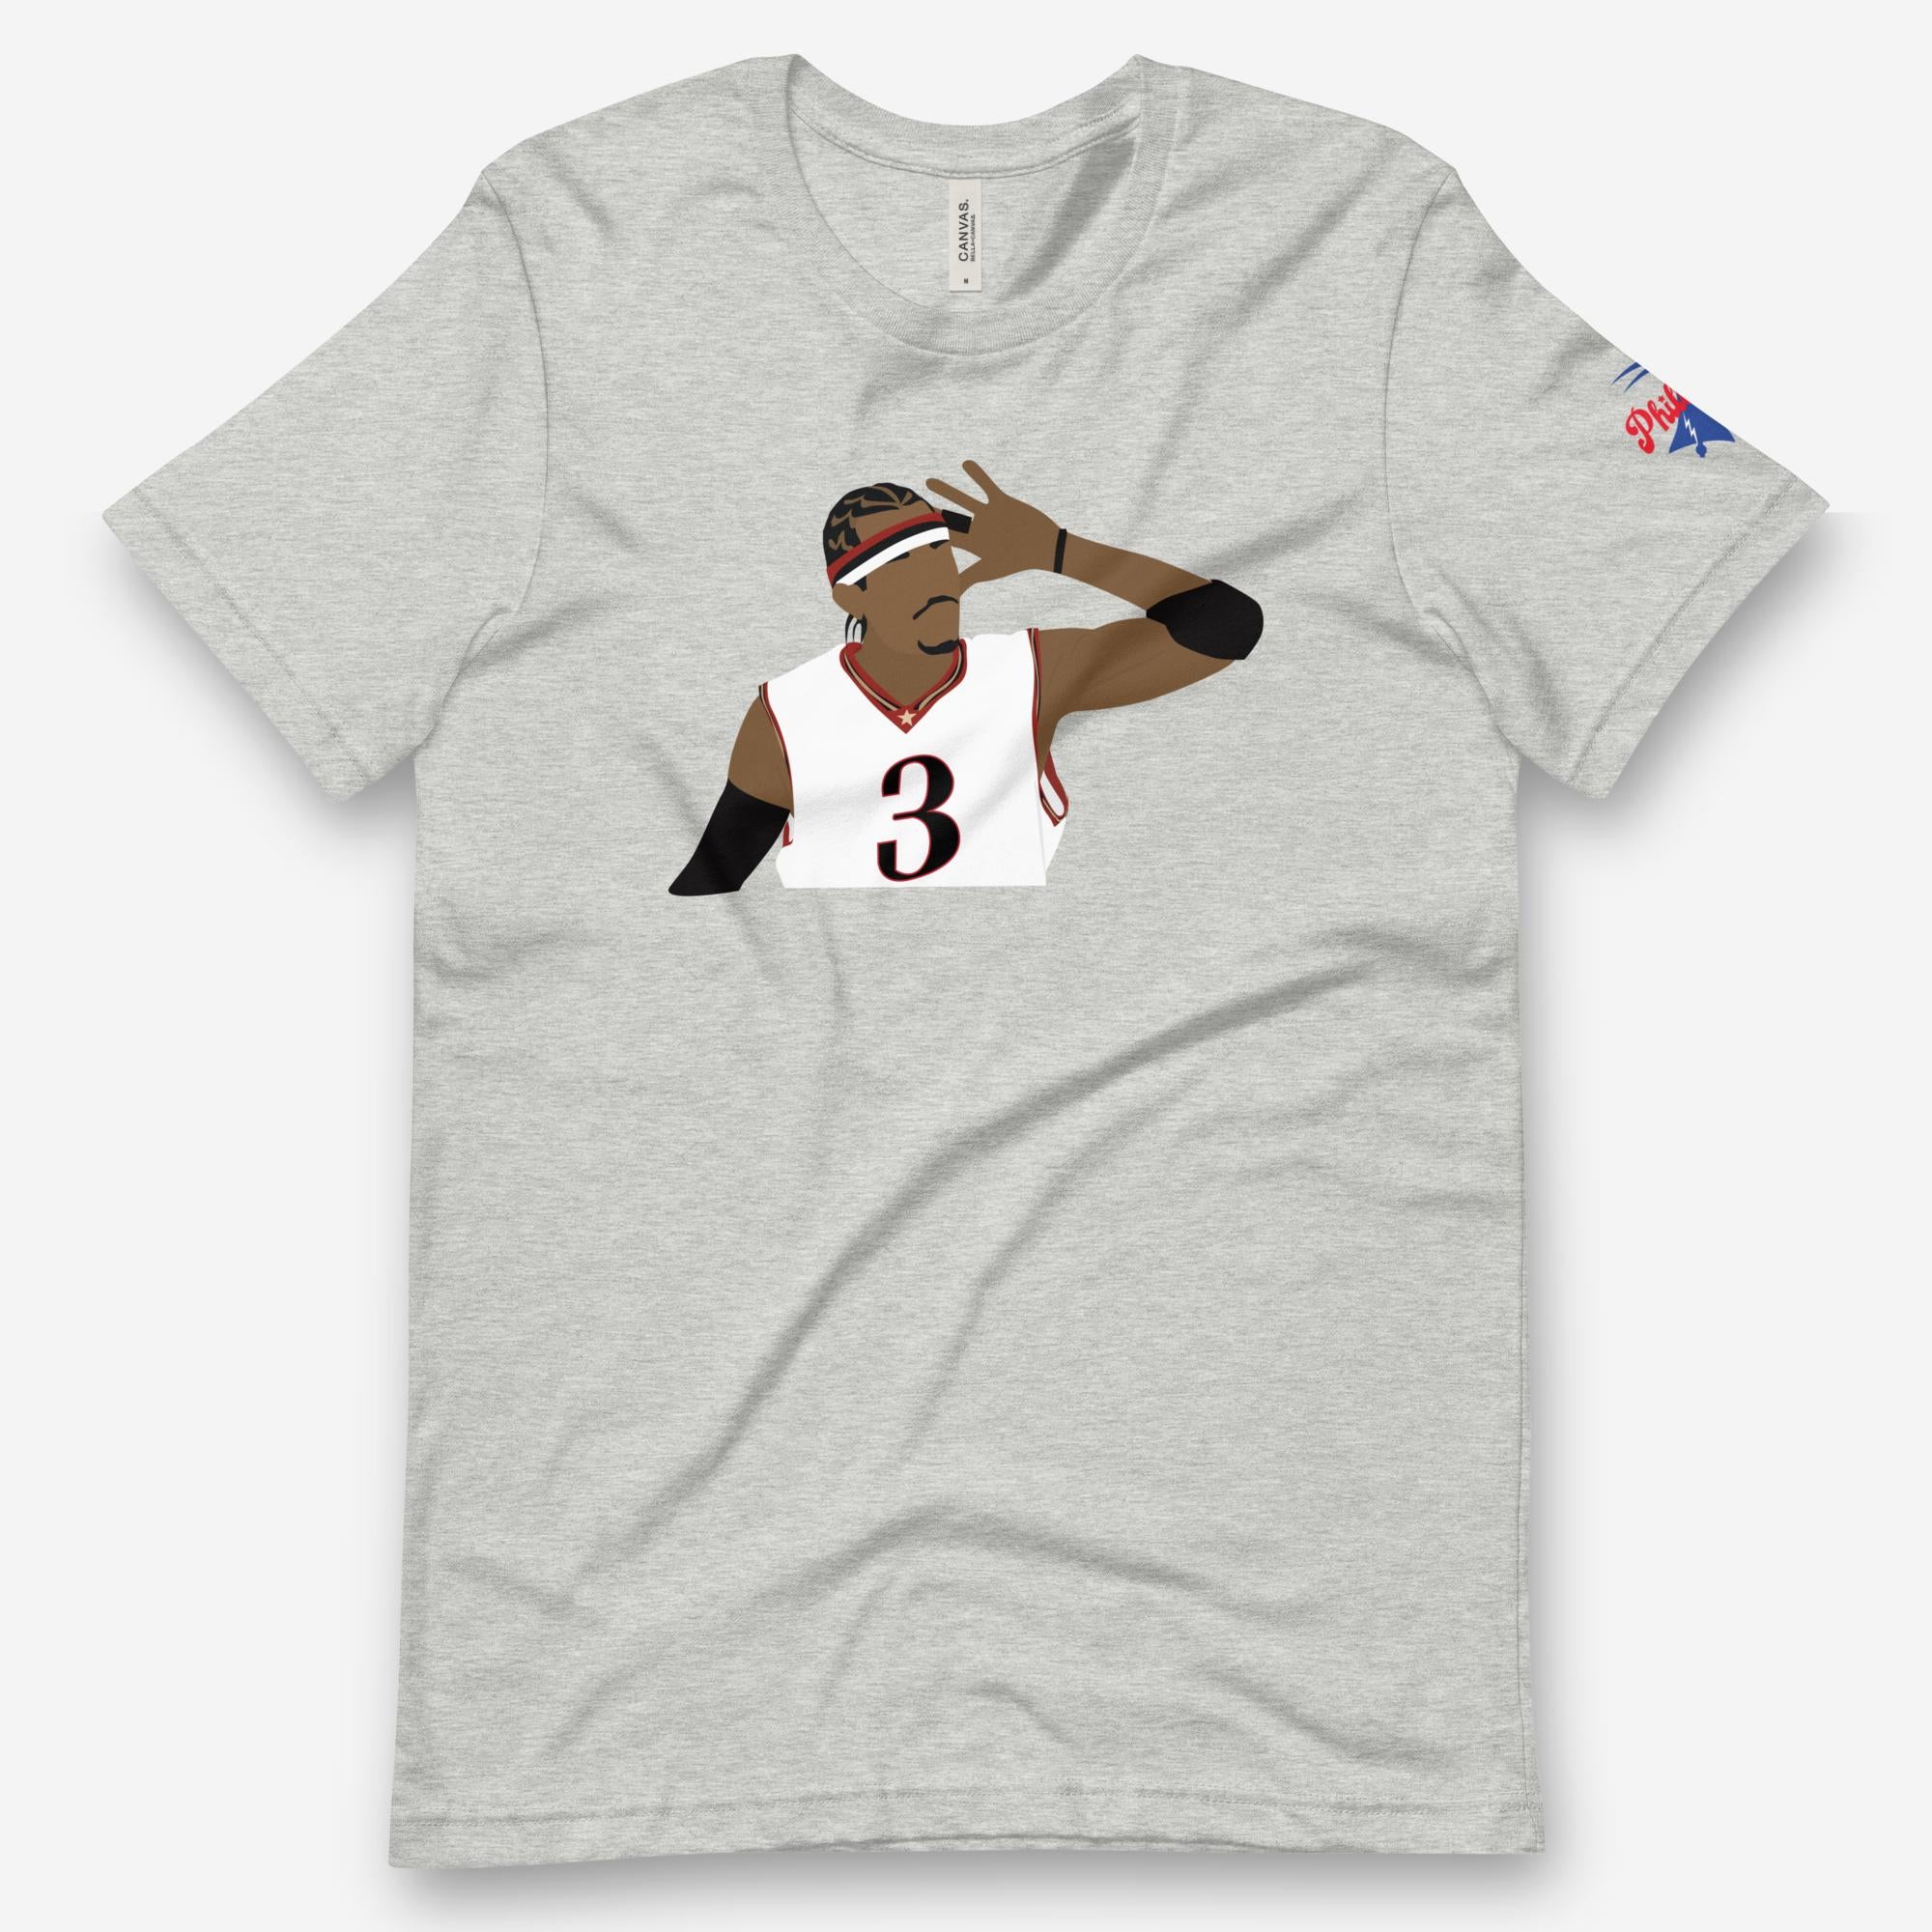 "The Answer" Tee